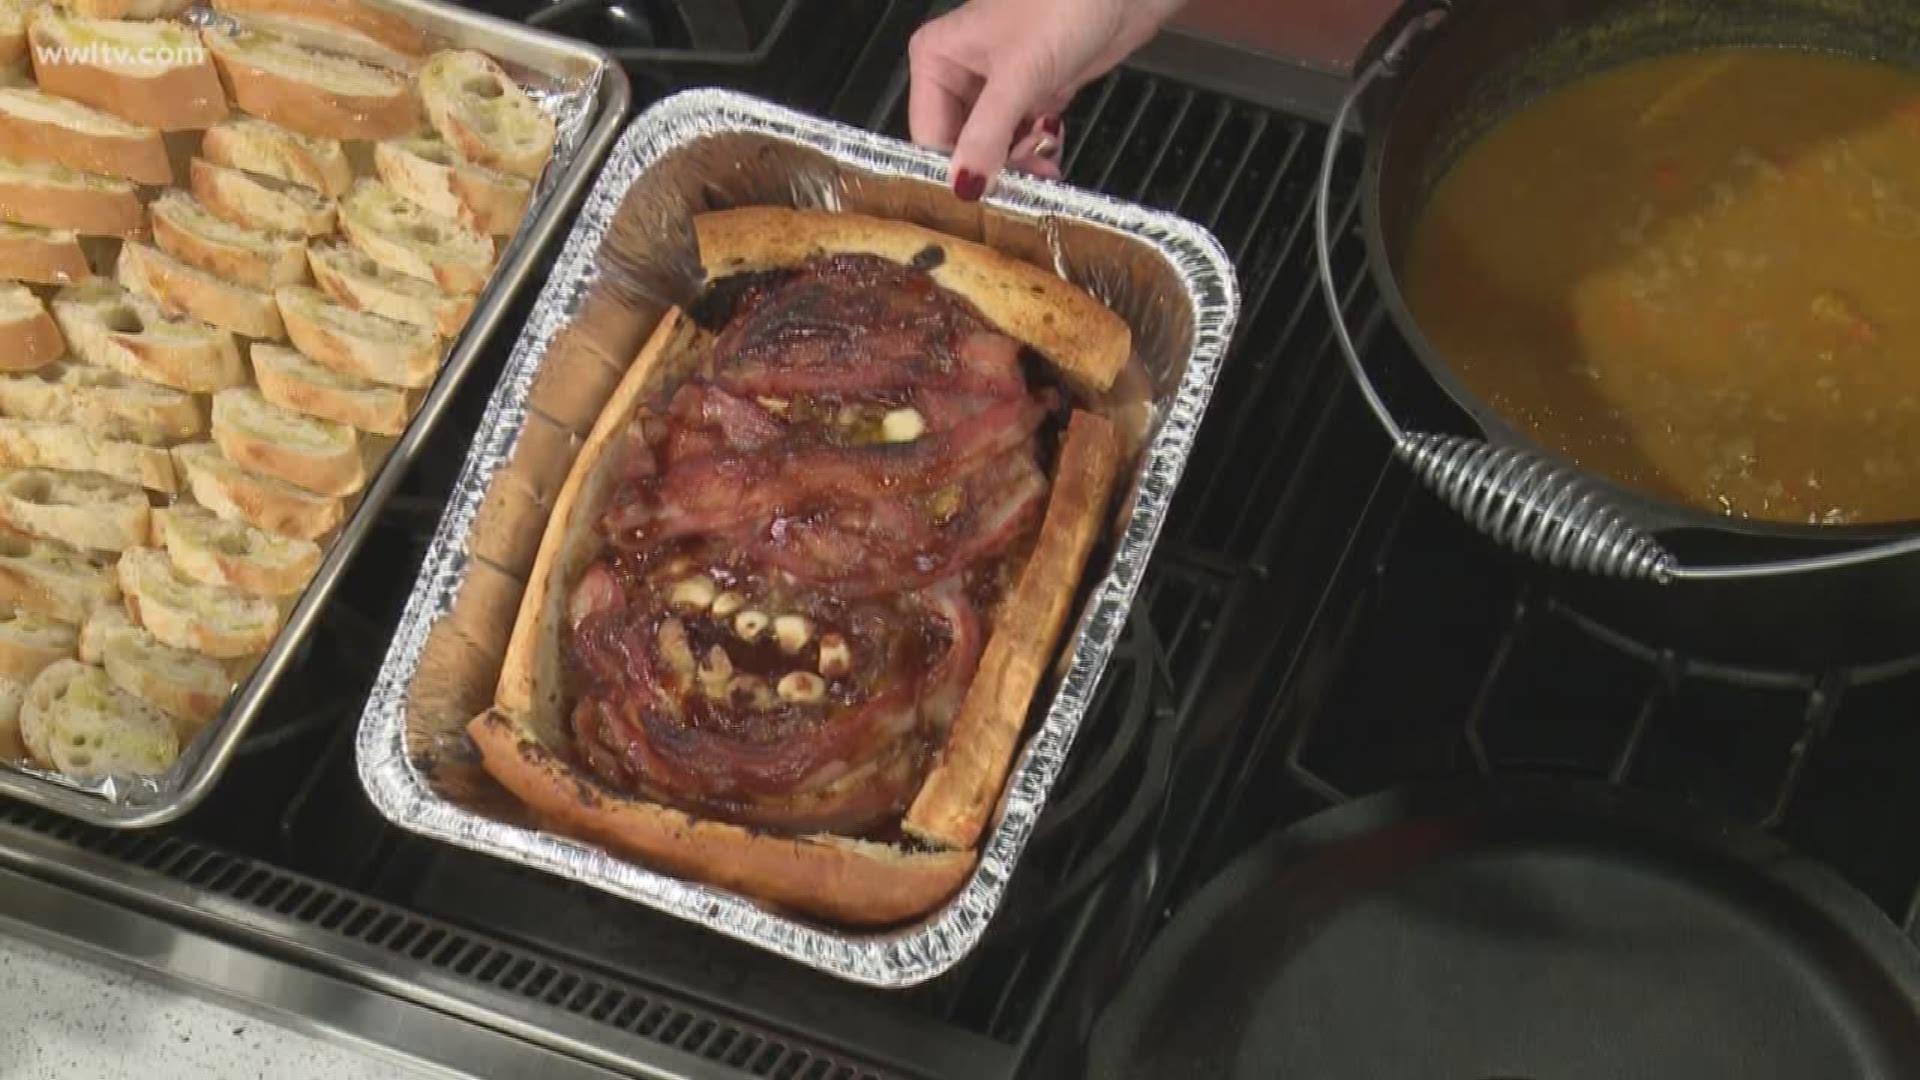 Chef Kevin and Jade are in the kitchen with some "spook-tacular" Halloween party dishes.